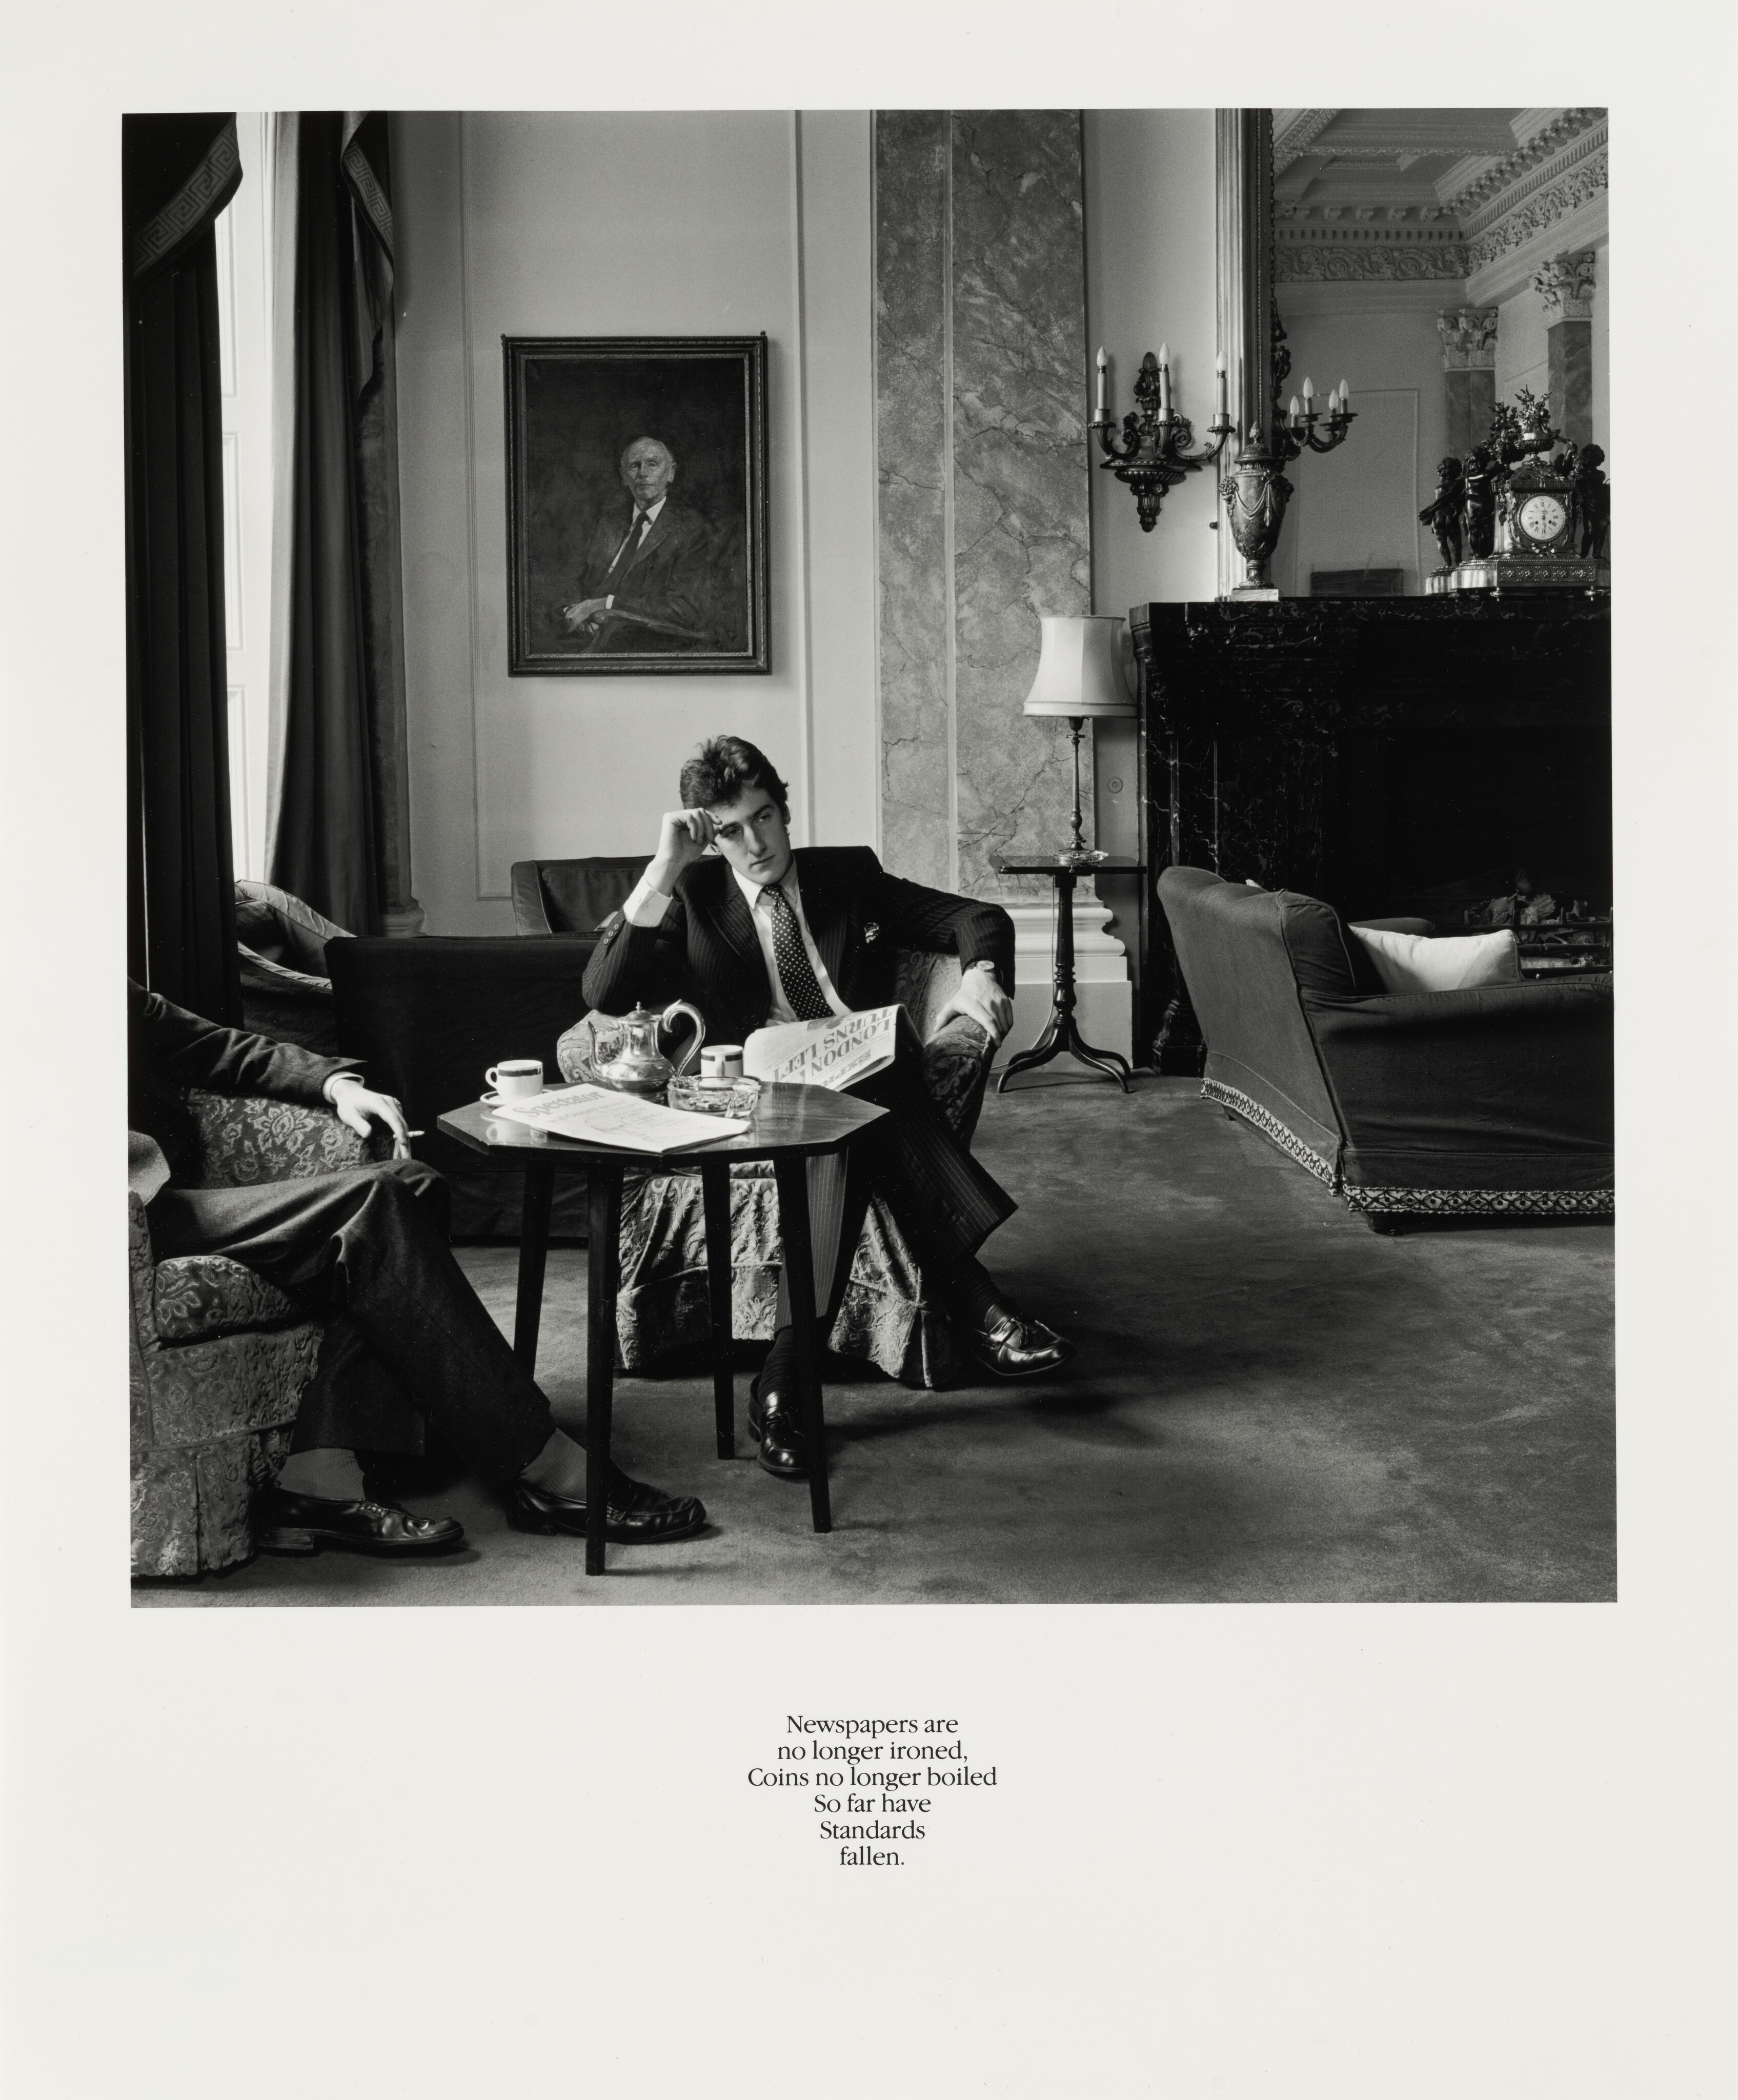 Newspapers are no longer ironed, Coins no longer boiled So far have Standards Fallen from the series Gentlemen, 1981 - 1983, printed 2015 gelatin silver print image: 40.6 × 40.5 cm (16 × 15 15/16 in.) sheet: 61.5 × 50.7 cm (24 3/16 × 19 15/16 in.) mat: 71 × 55.8 cm (27 15/16 × 21 15/16 in.) National Gallery of Art, Washington, Alfred H. Moses and Fern M. Schad Fund